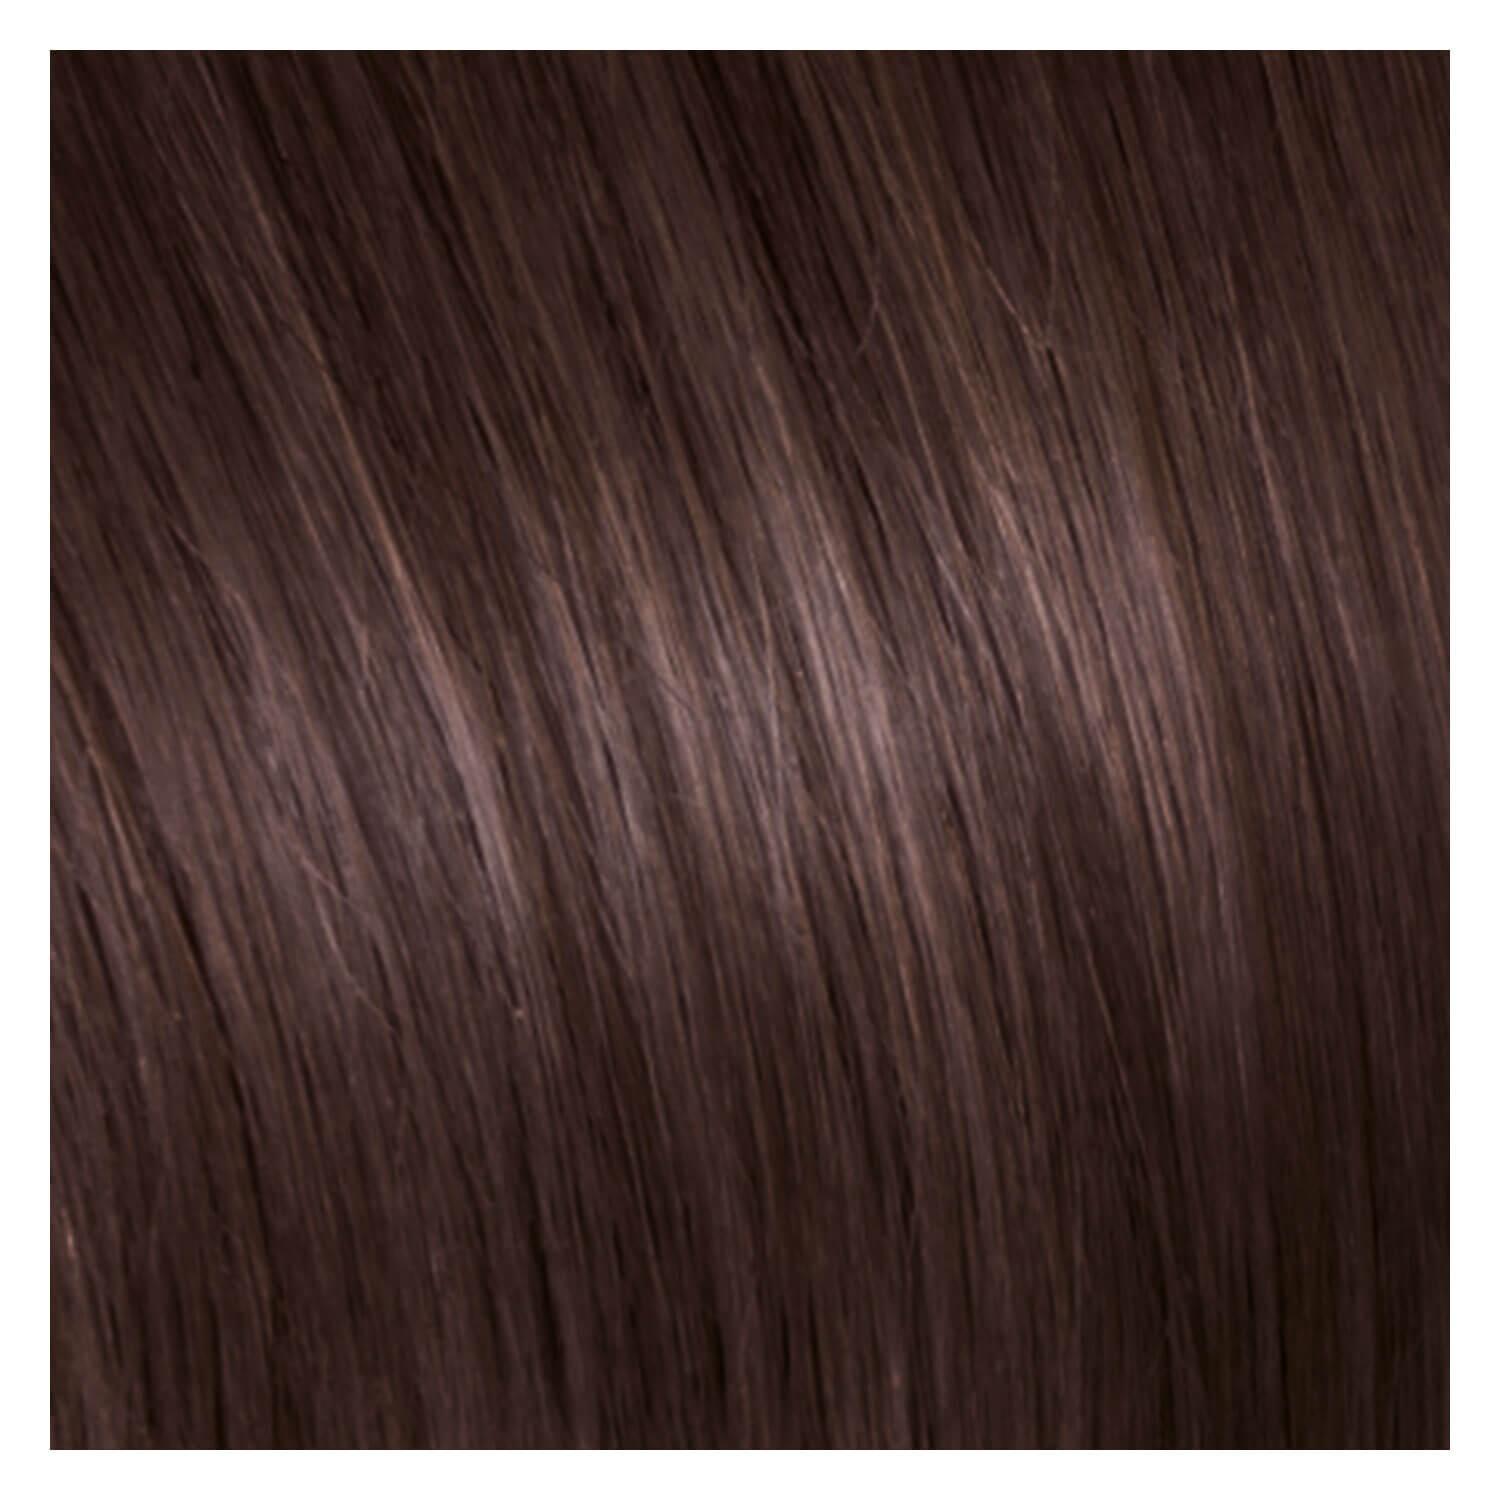 SHE Clip In-System Hair Extensions - 6 Light Chestnut Brown 50/55cm